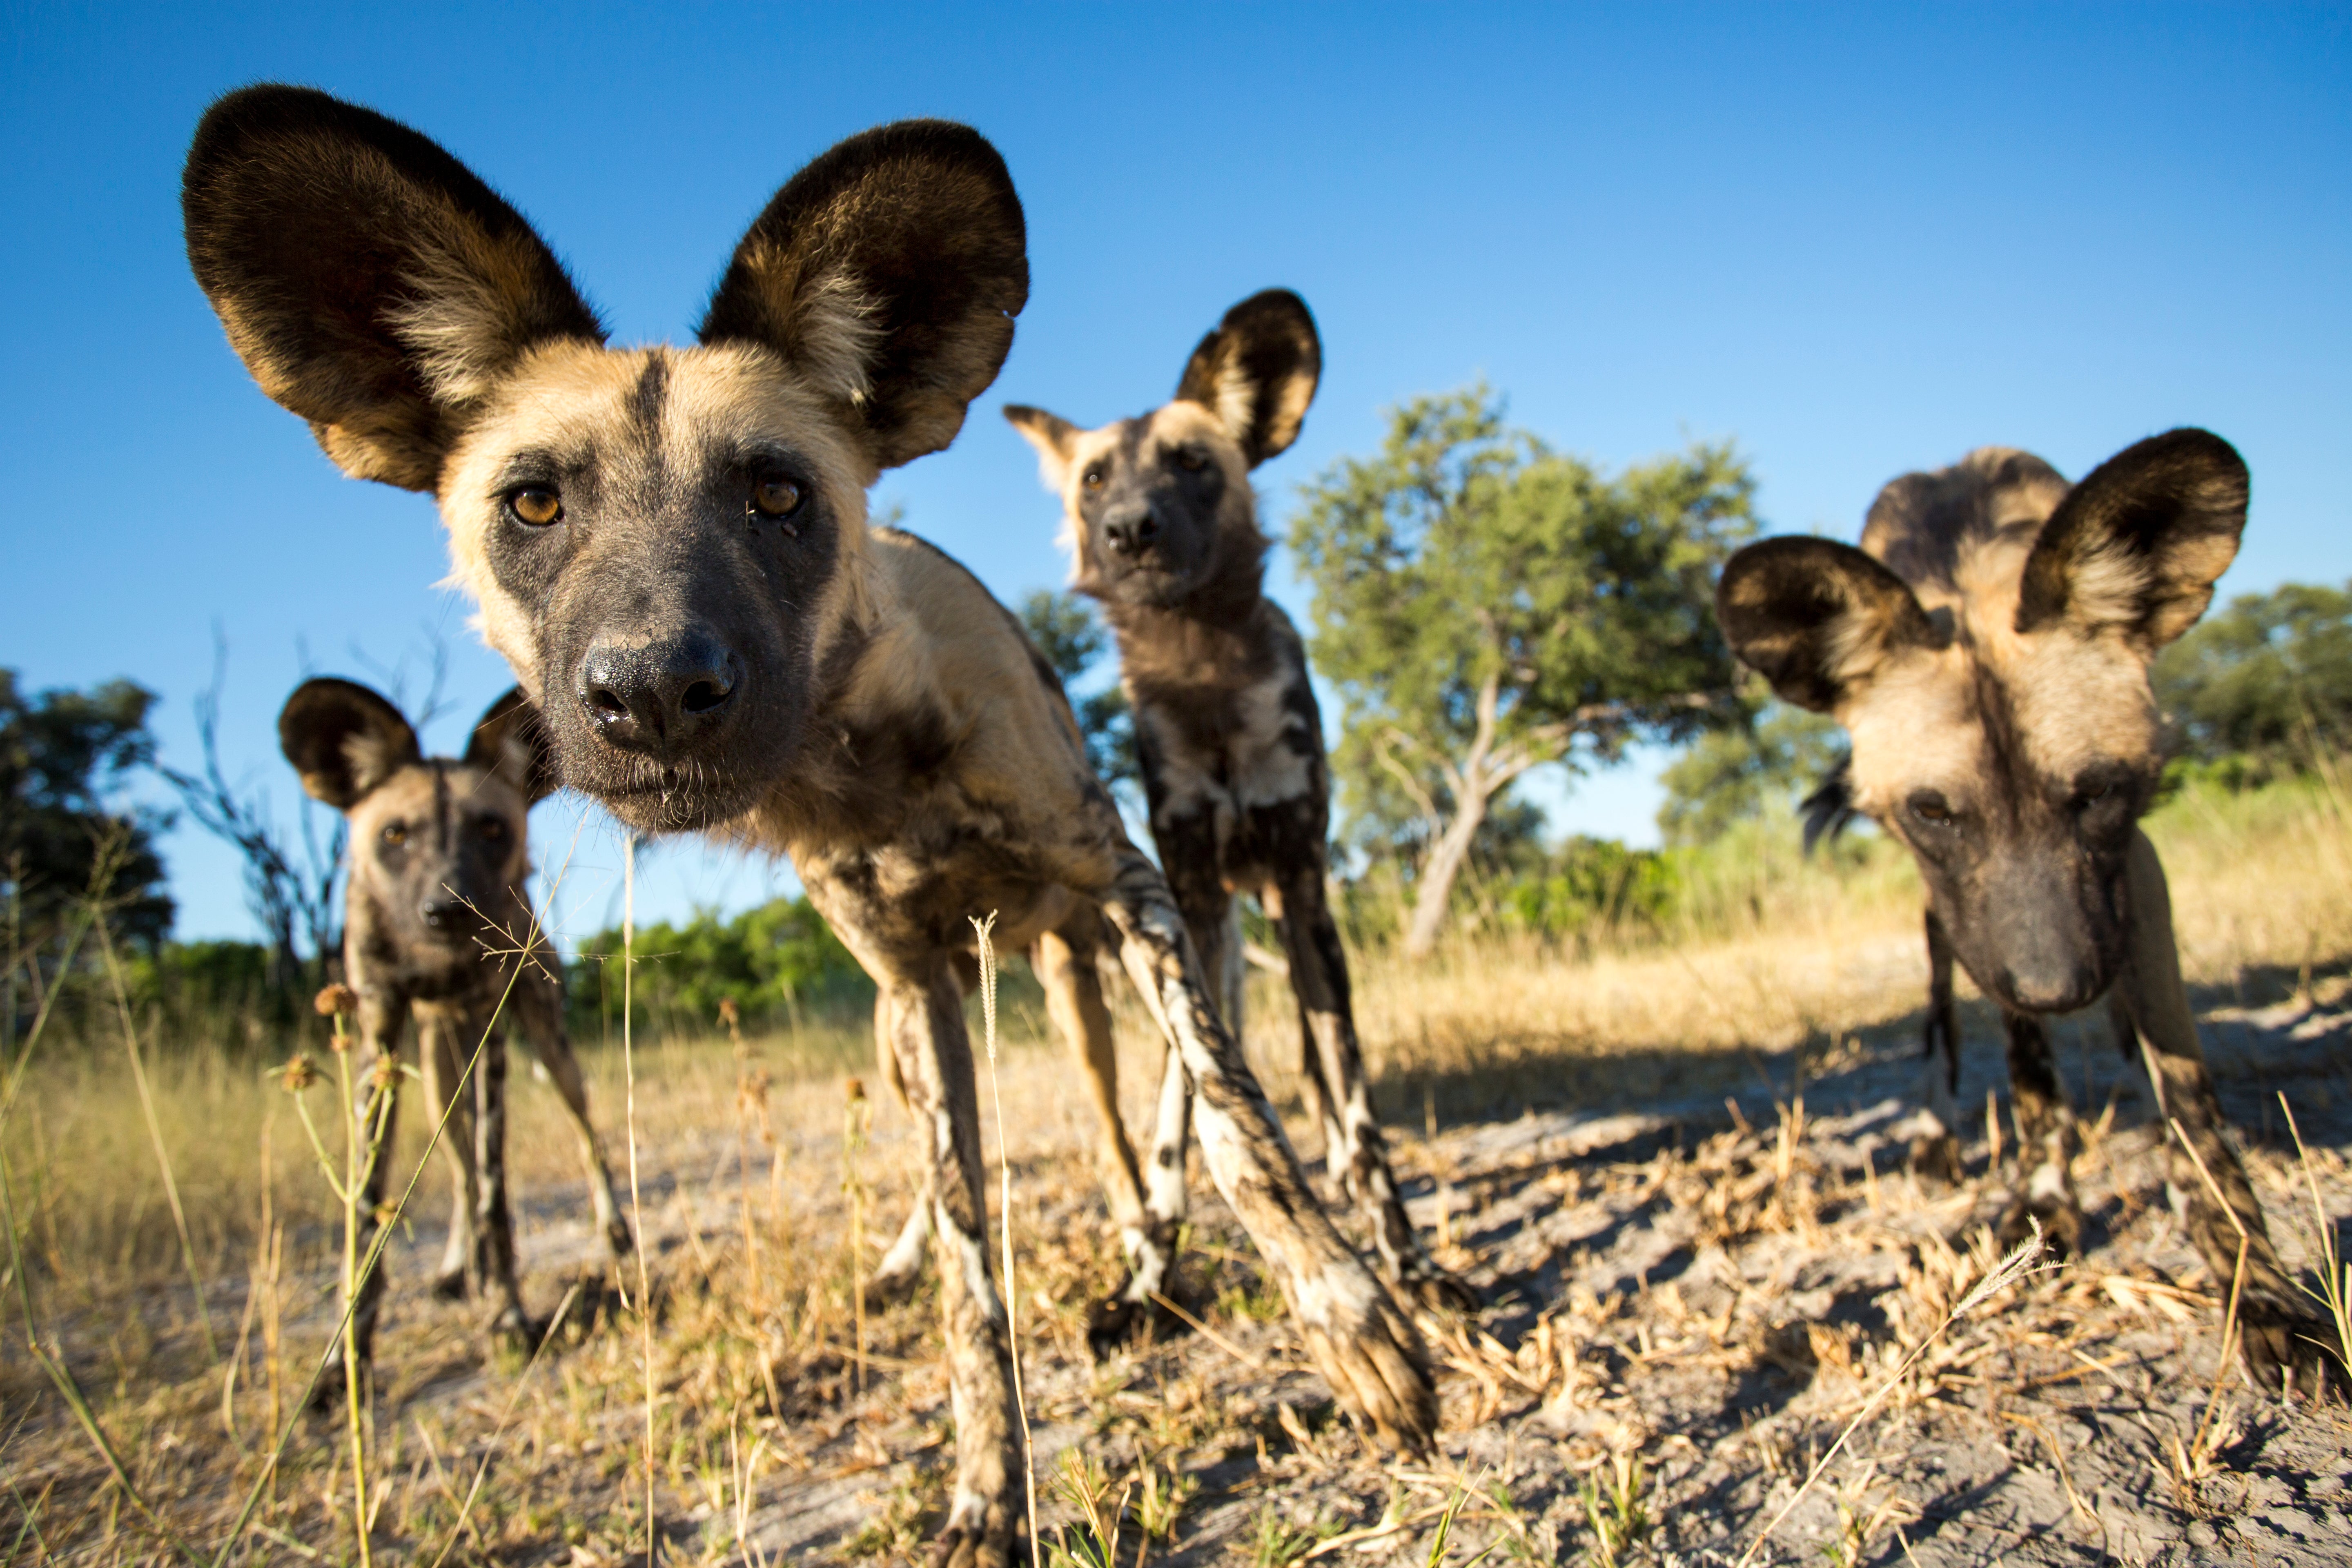 4 African wild dogs (Lycaon pictus) warily approach.